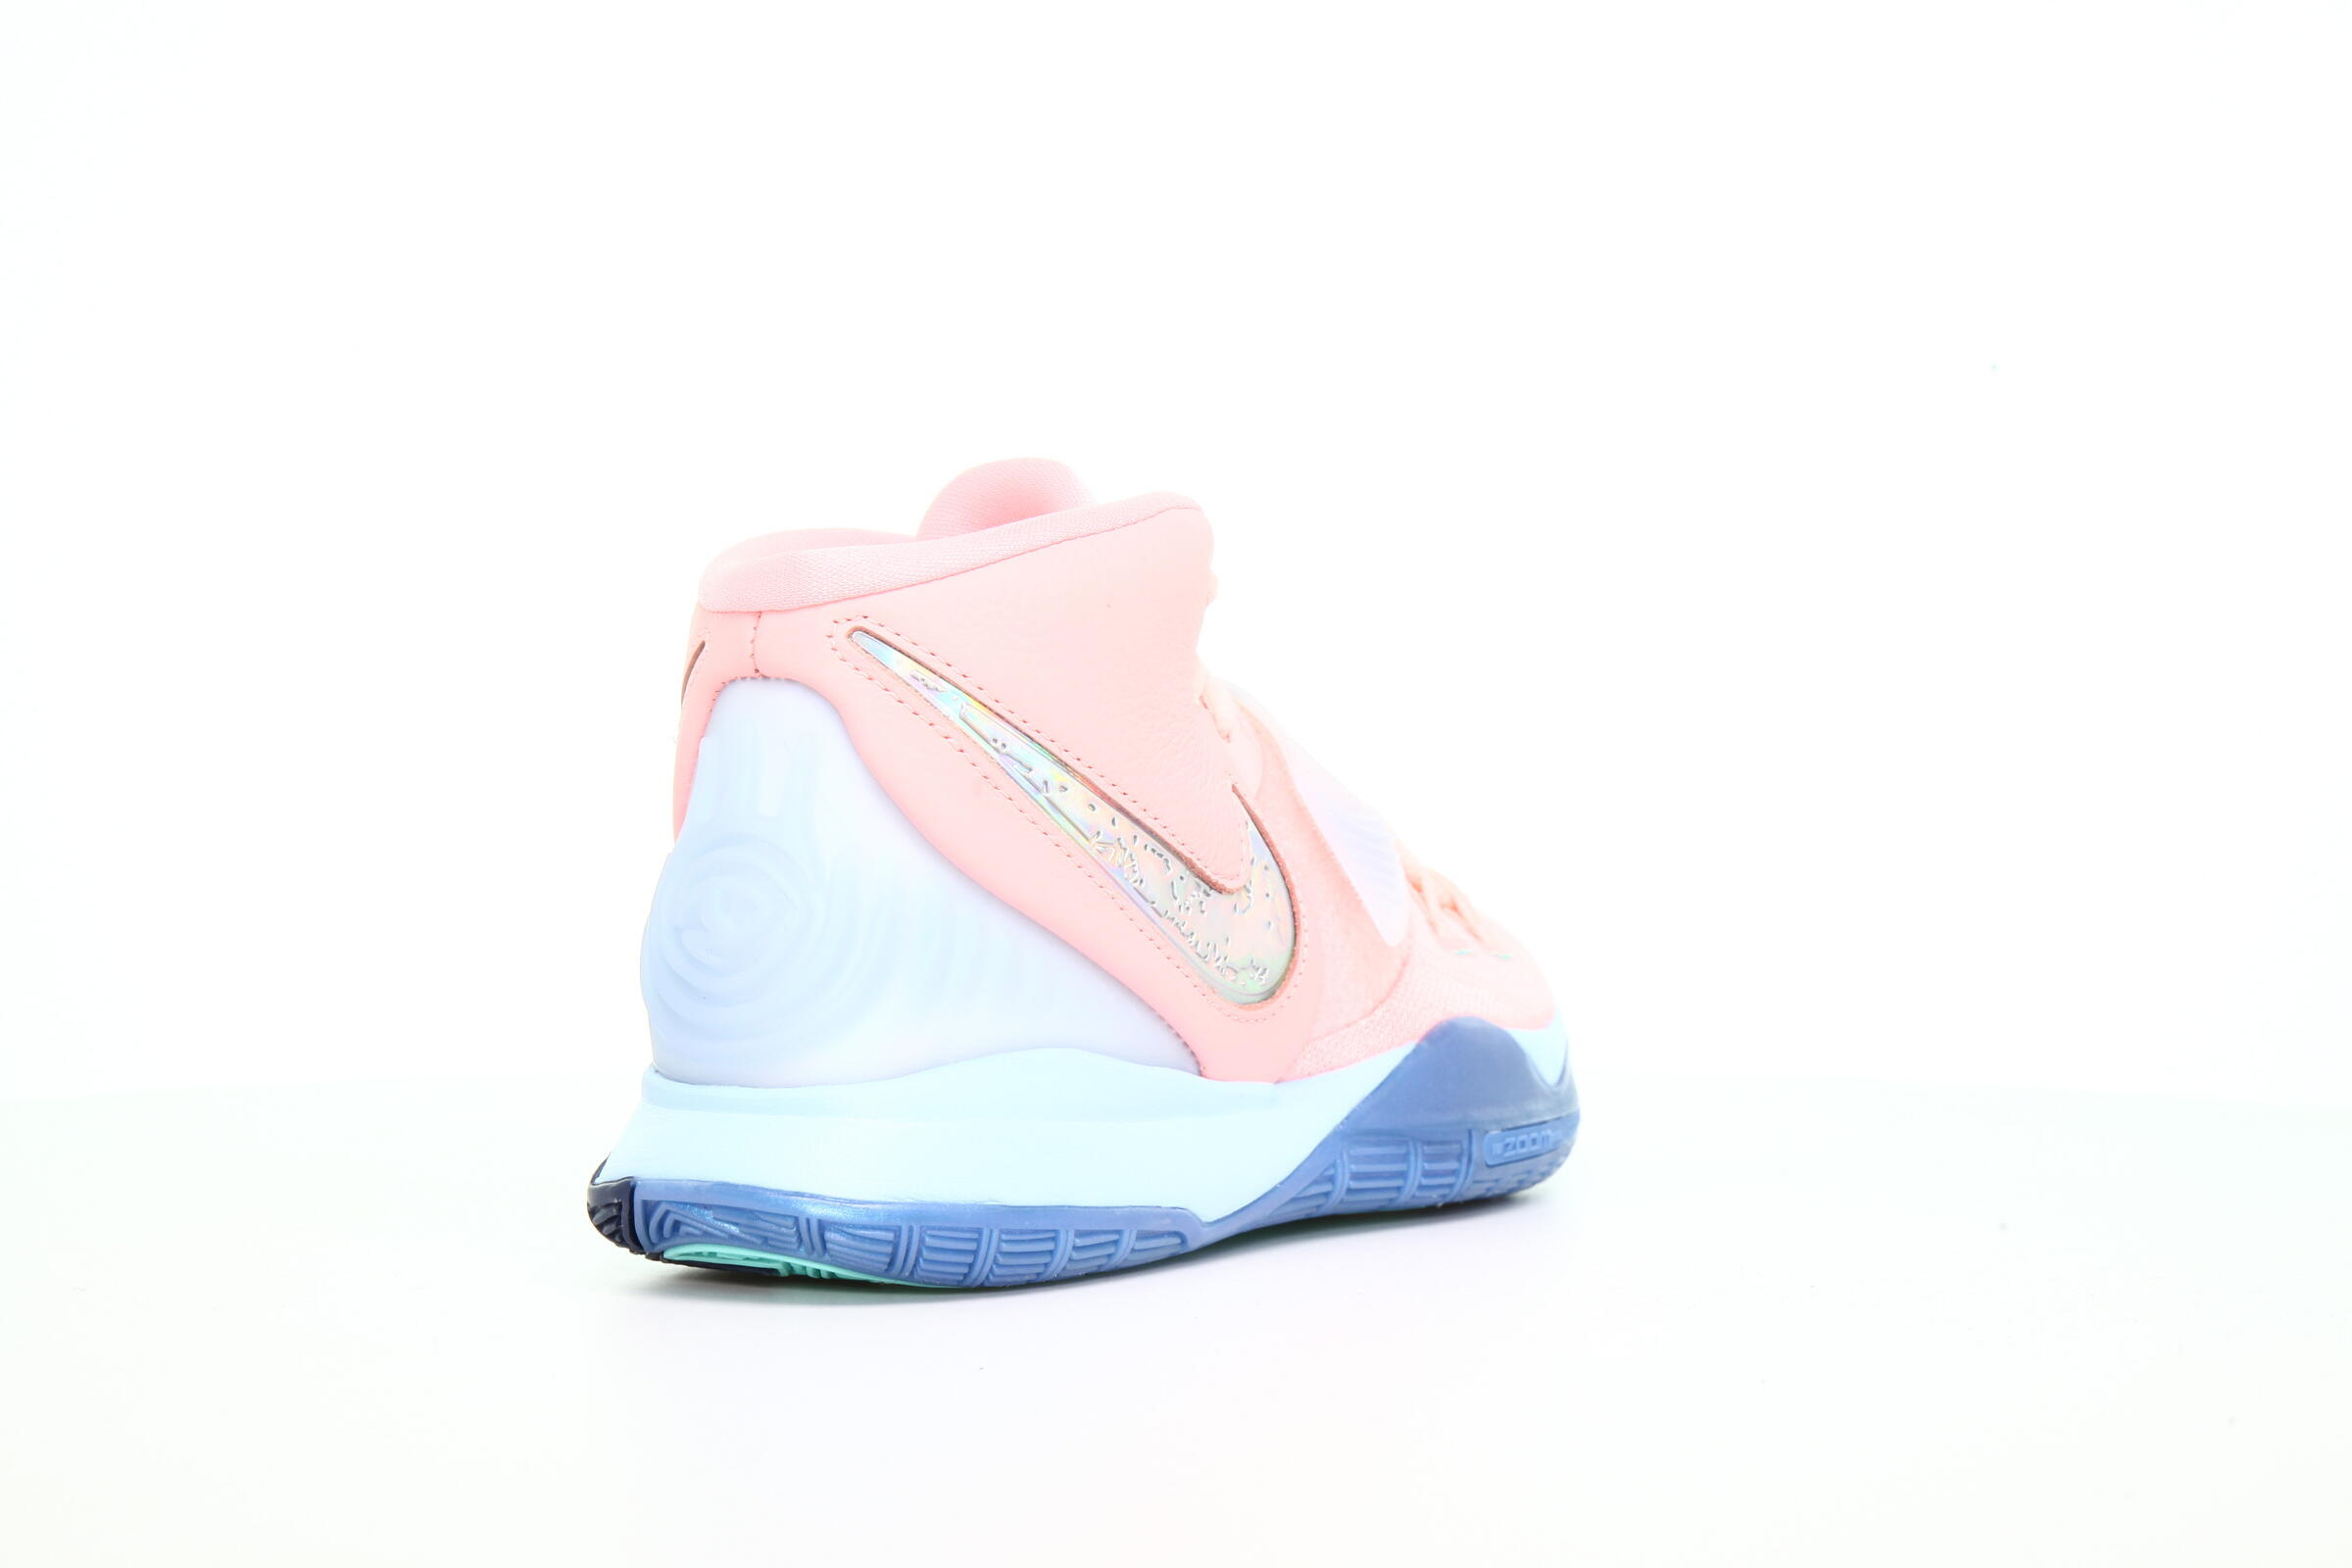 Nike x Concepts Kyrie 6  "Pink Tint"